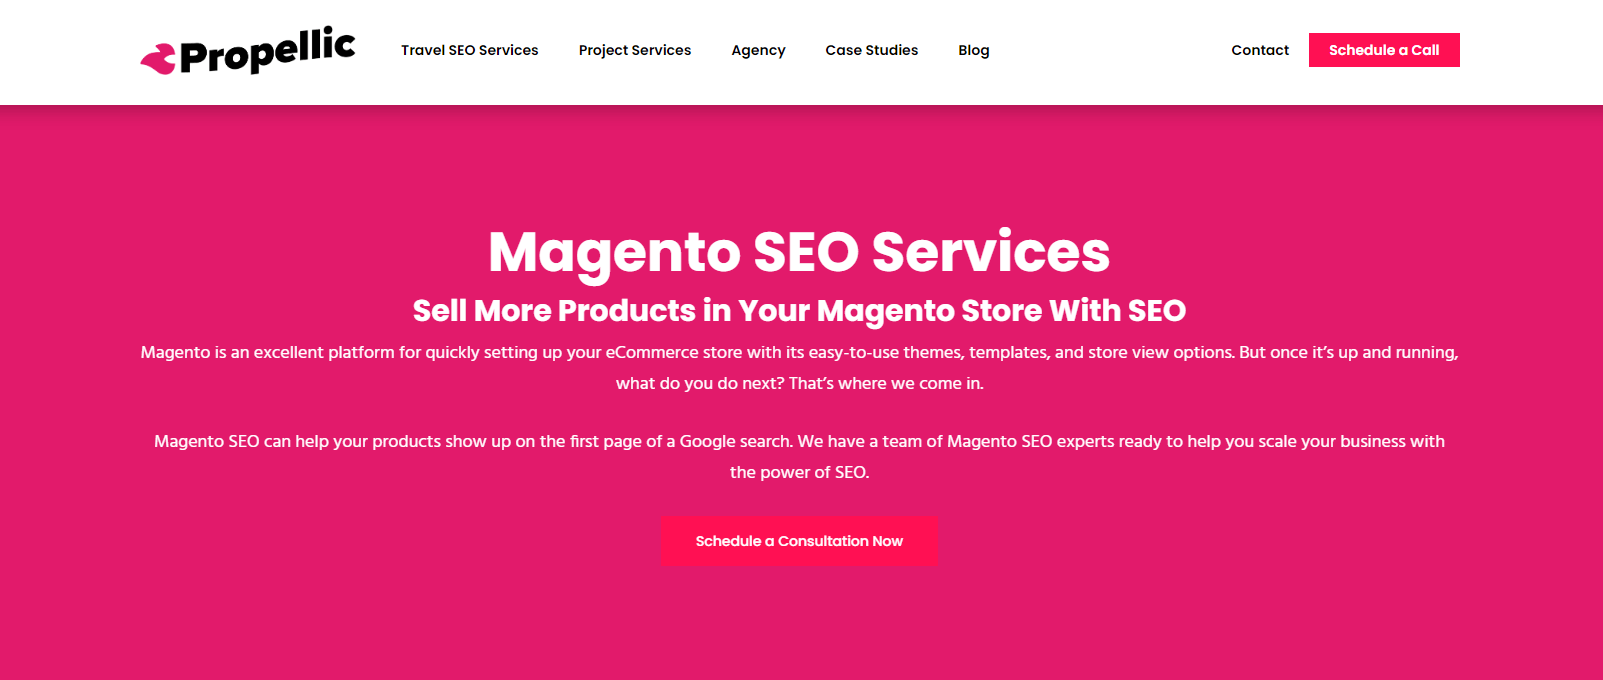 Magento SEO services by Propellic